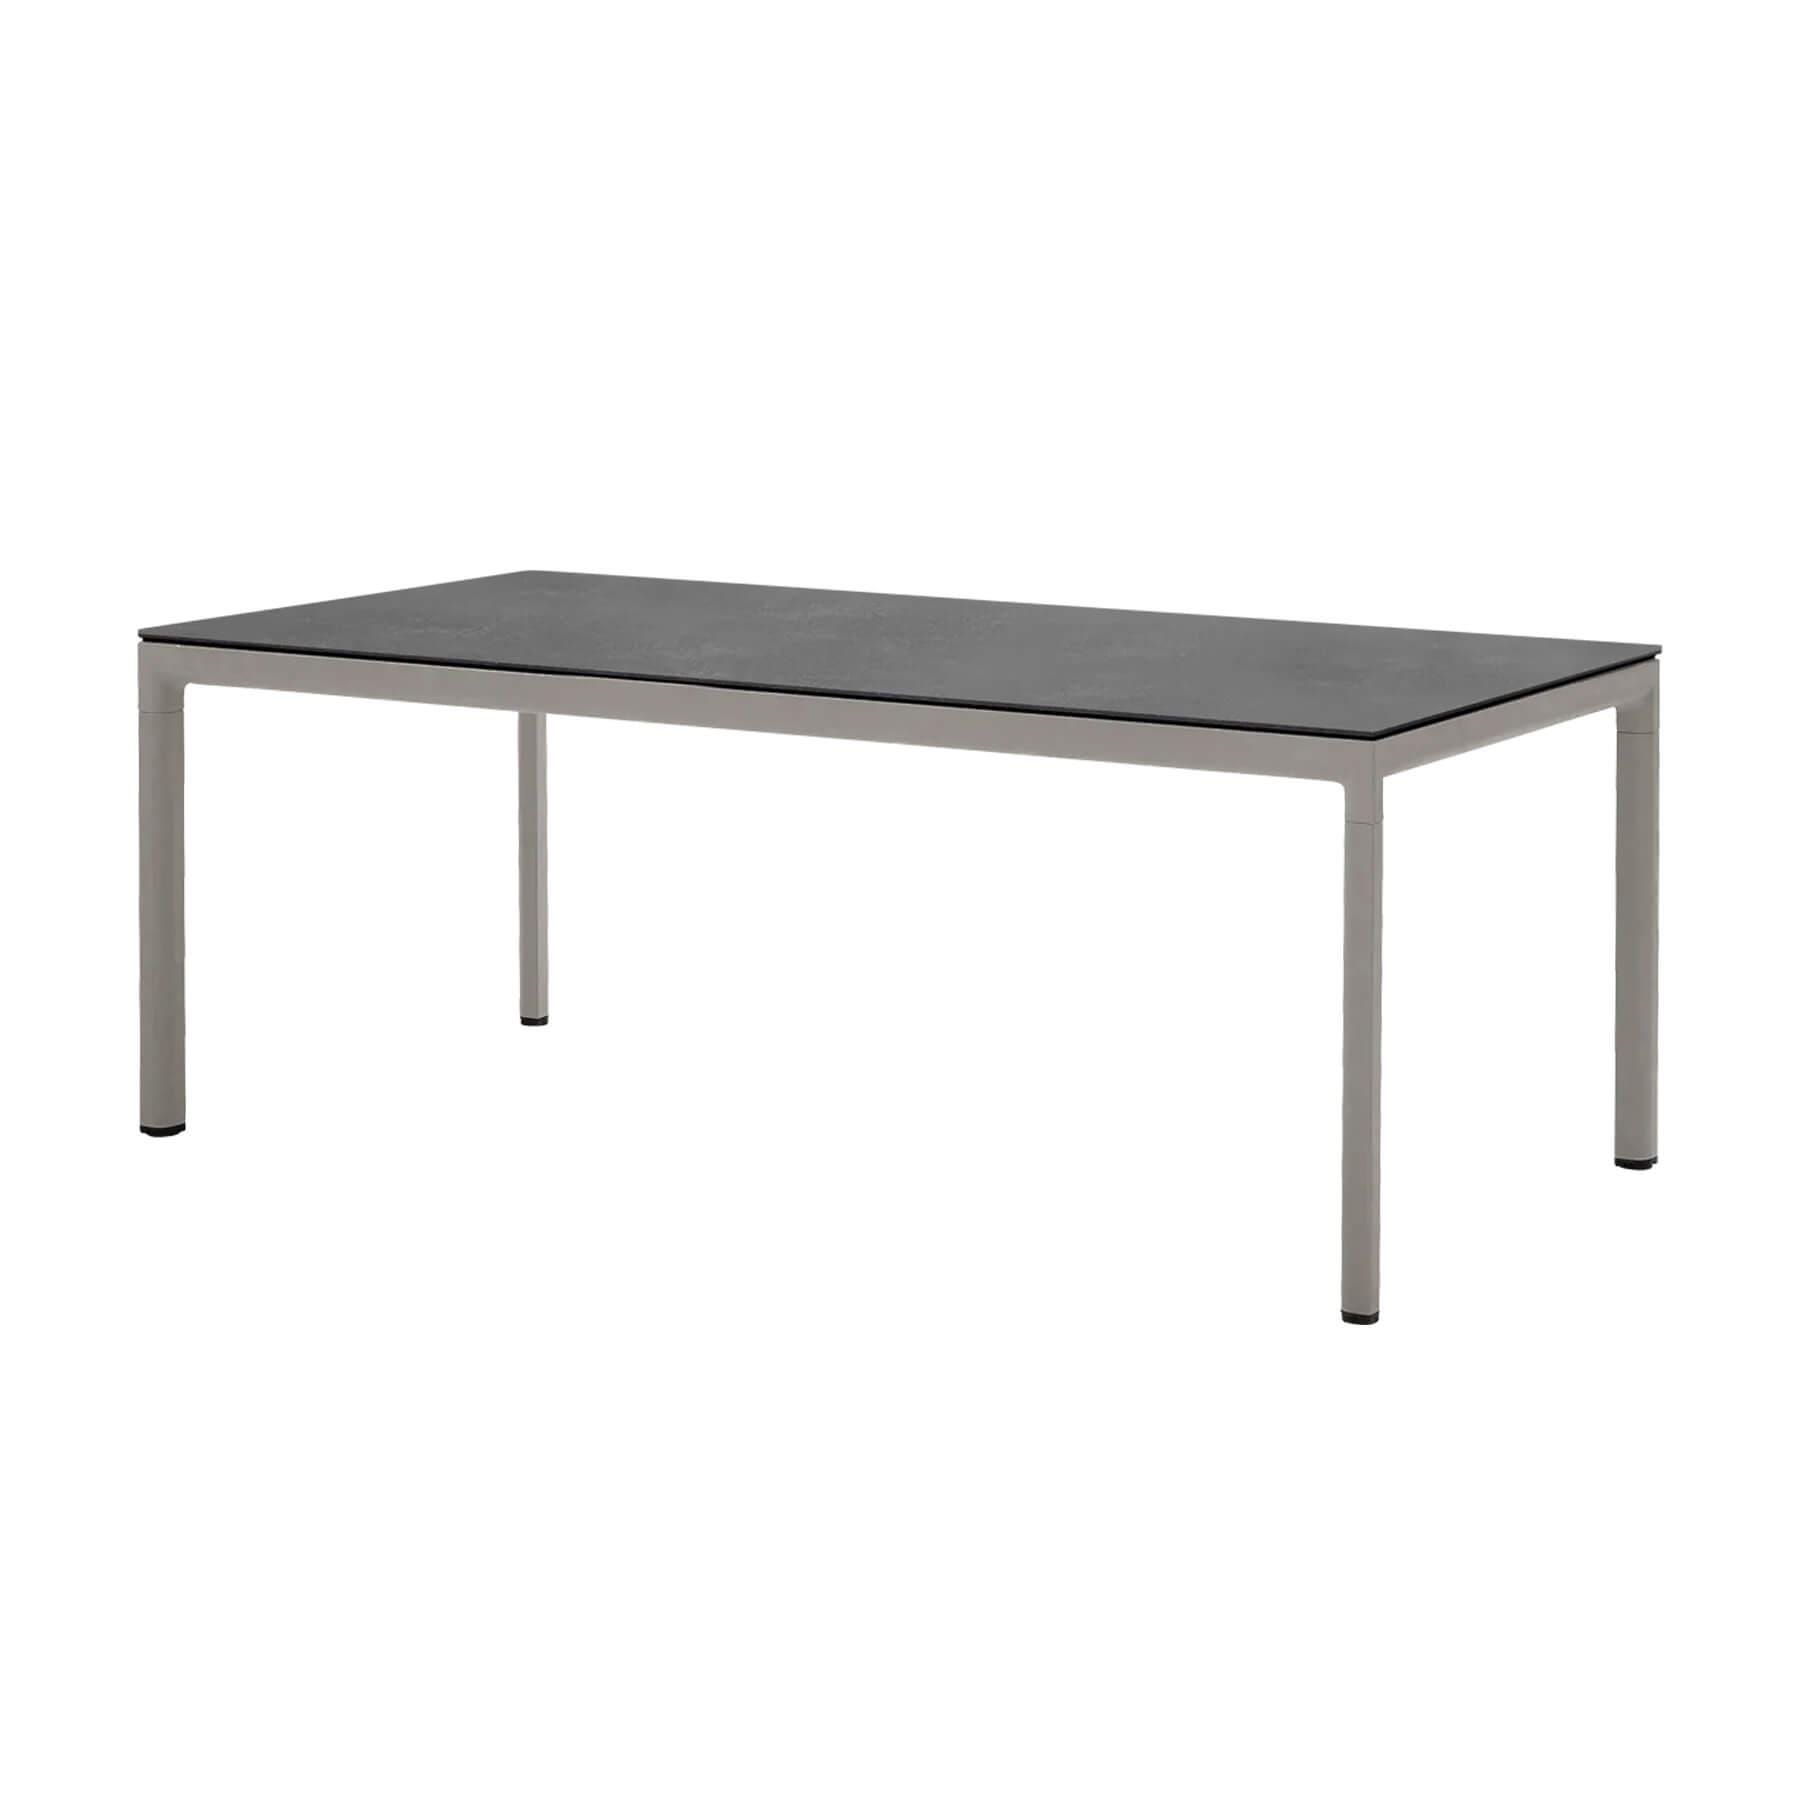 Caneline Drop Outdoor Dining Table Ceramic Fossil Black Top Taupe Legs